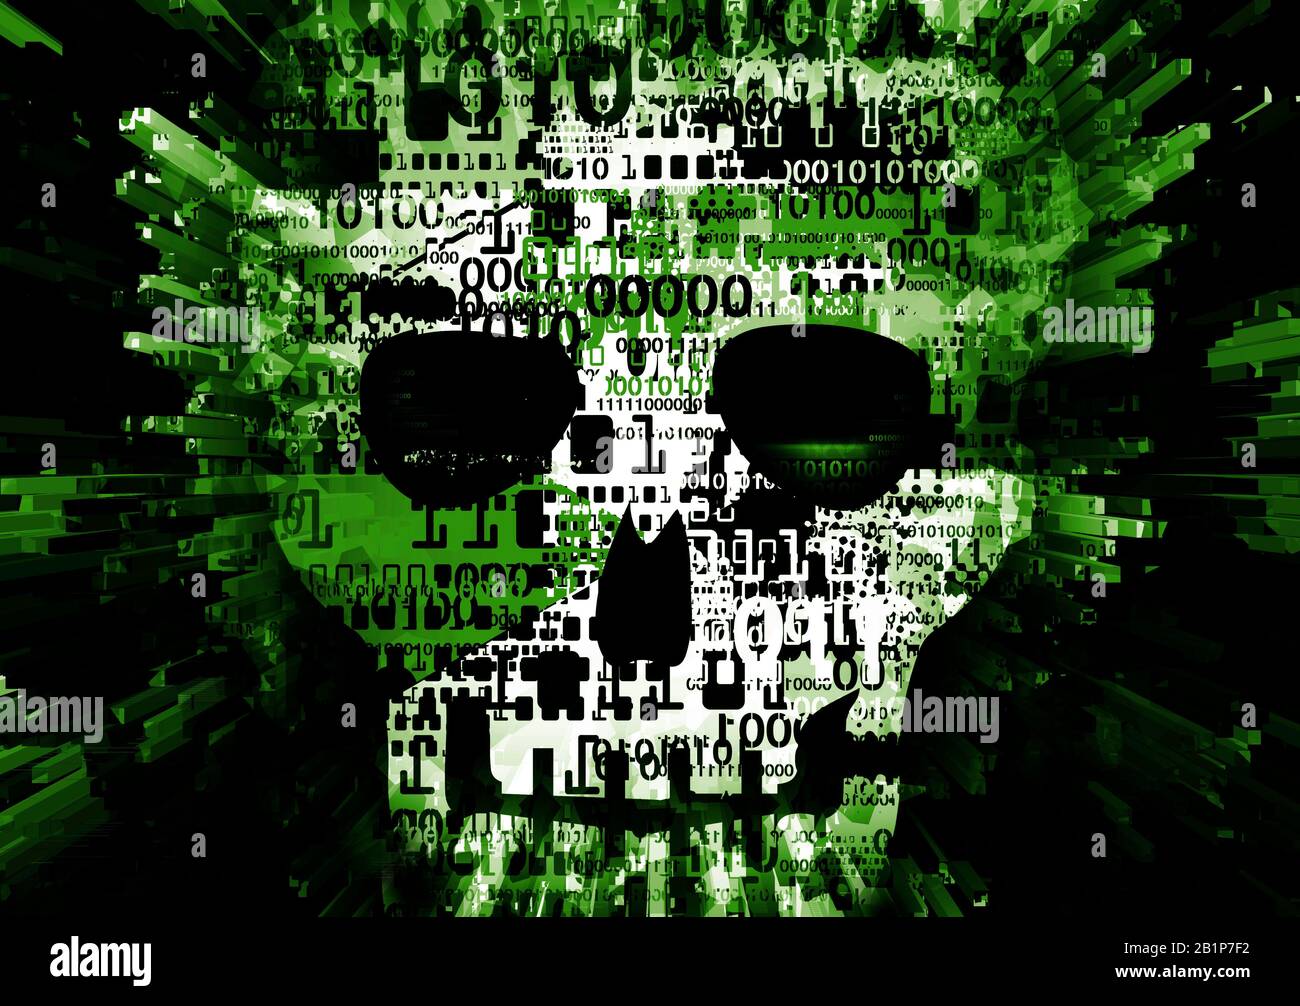 Virus skull,Explosion of Computer data.  Illustration of grunge stylized skull with destroyed binary codes. Symbol of online piracy, hacking. Stock Photo